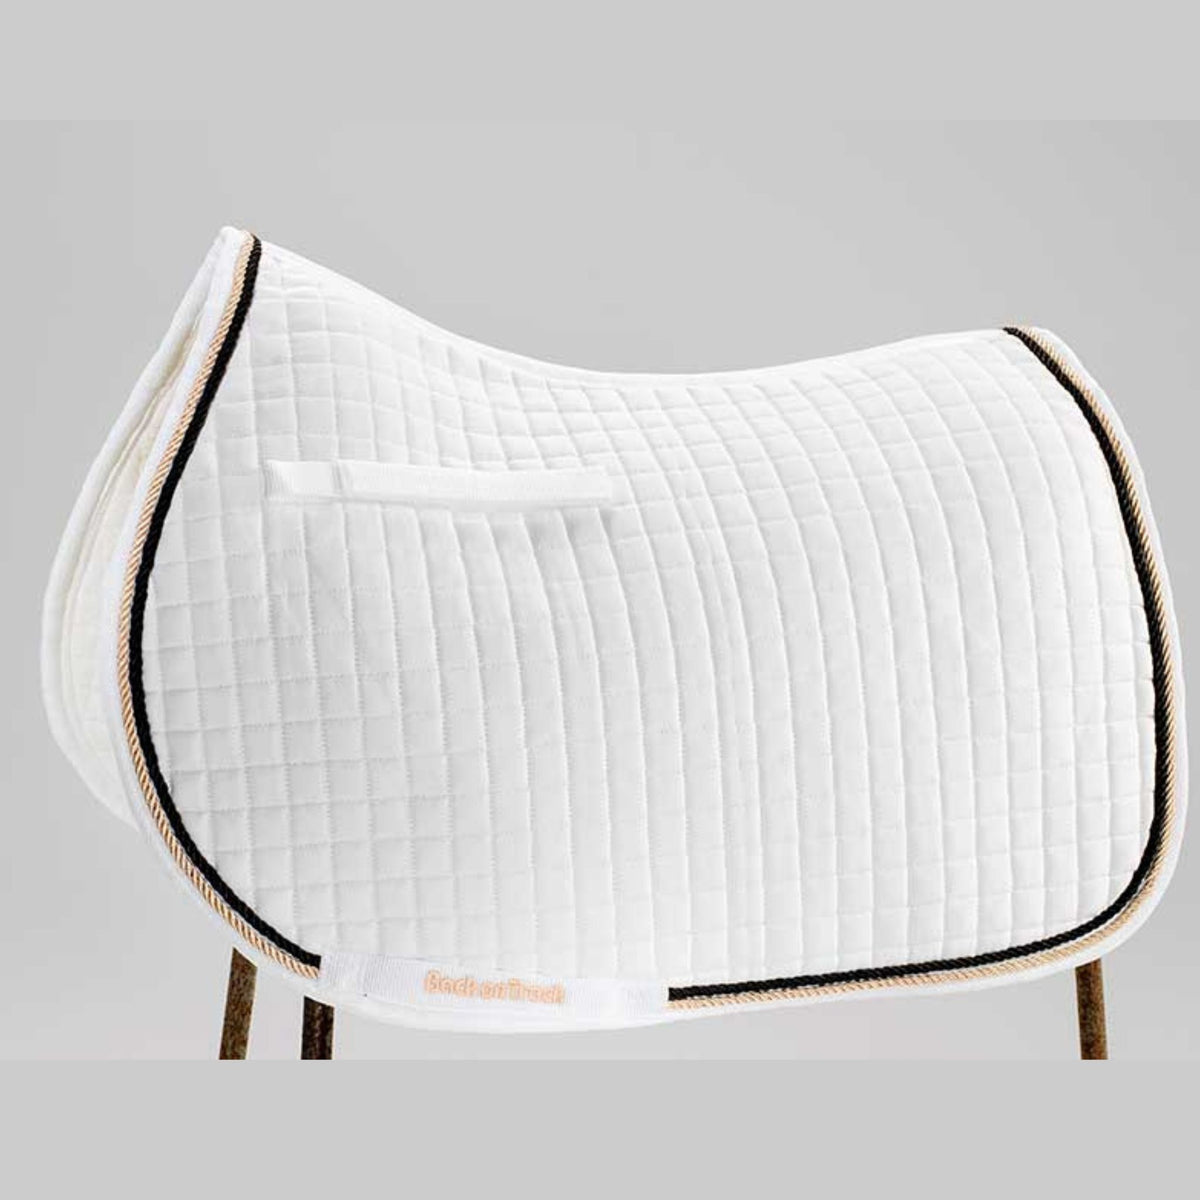 White saddle pad with gold and back trim, with keepers and a all purpose shape.